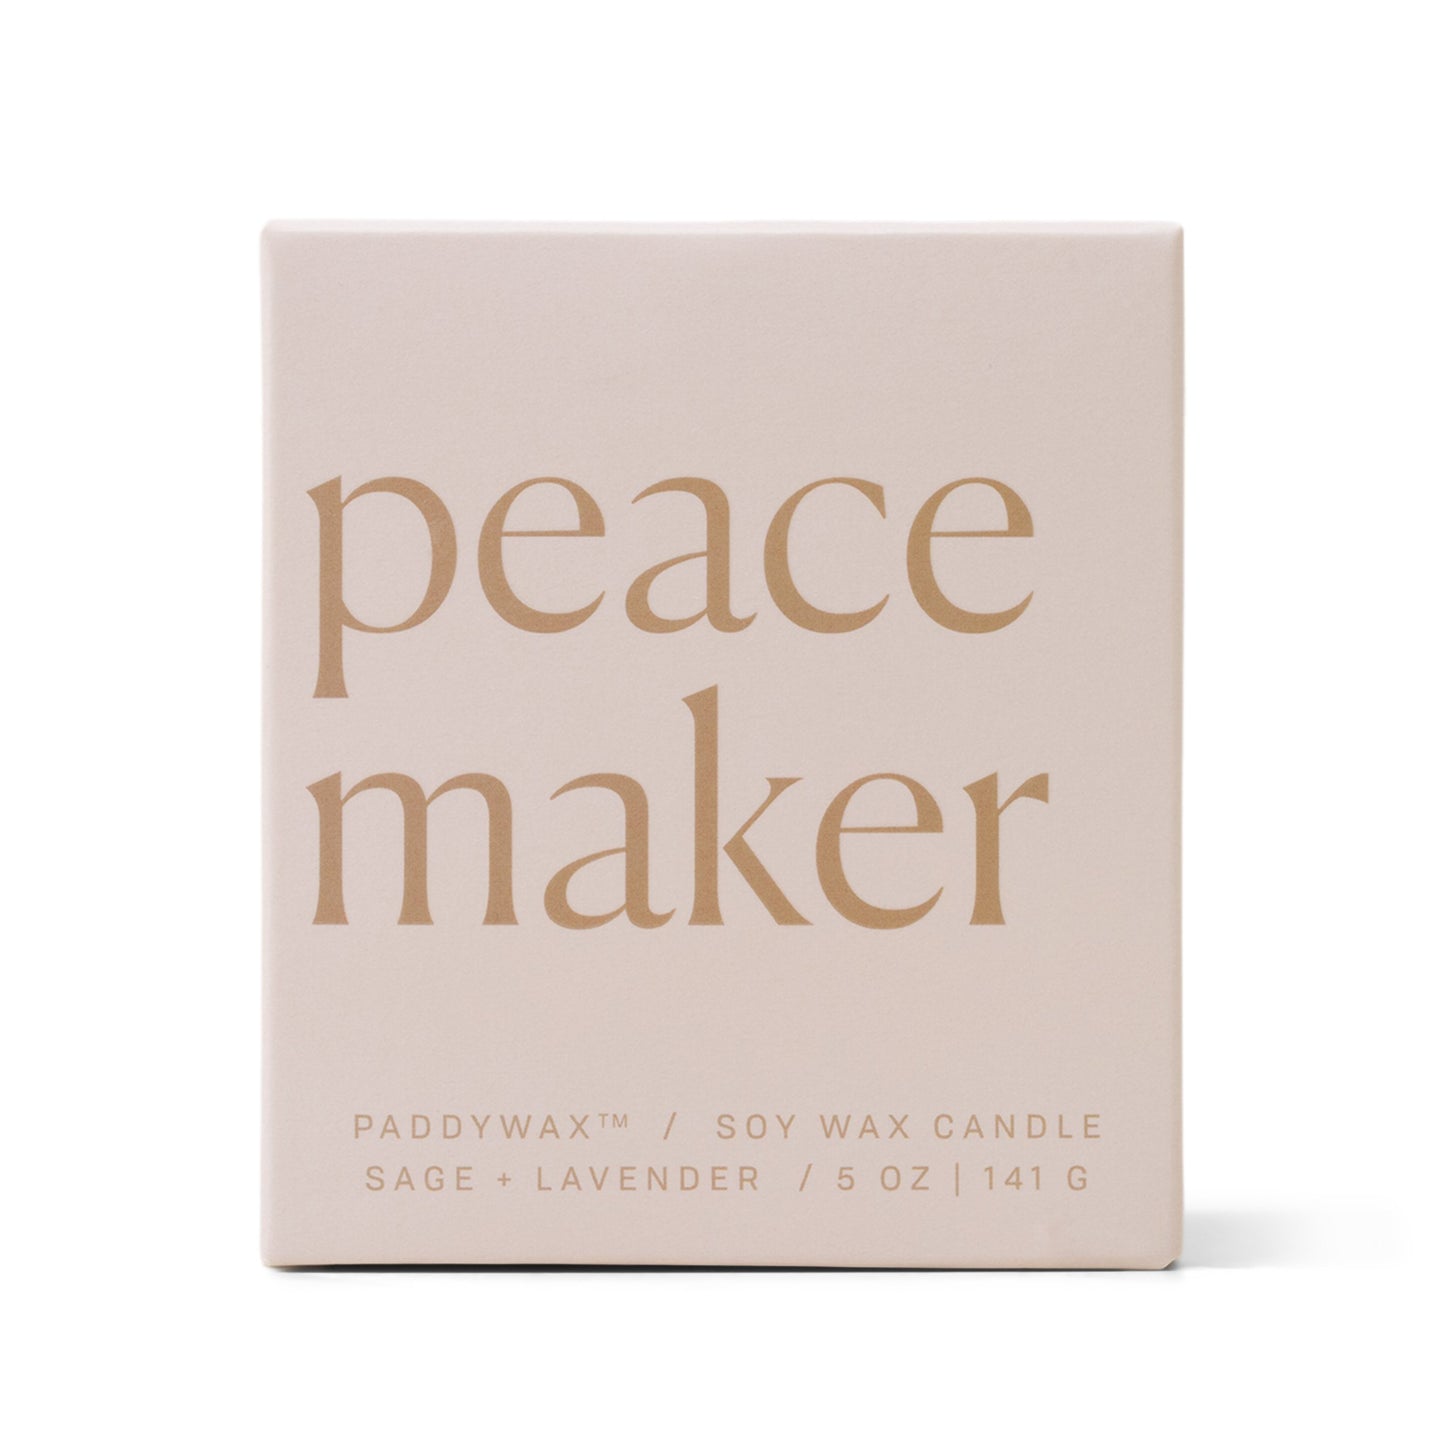 White box which reads "peace maker"; also has the number 9 printed on the side